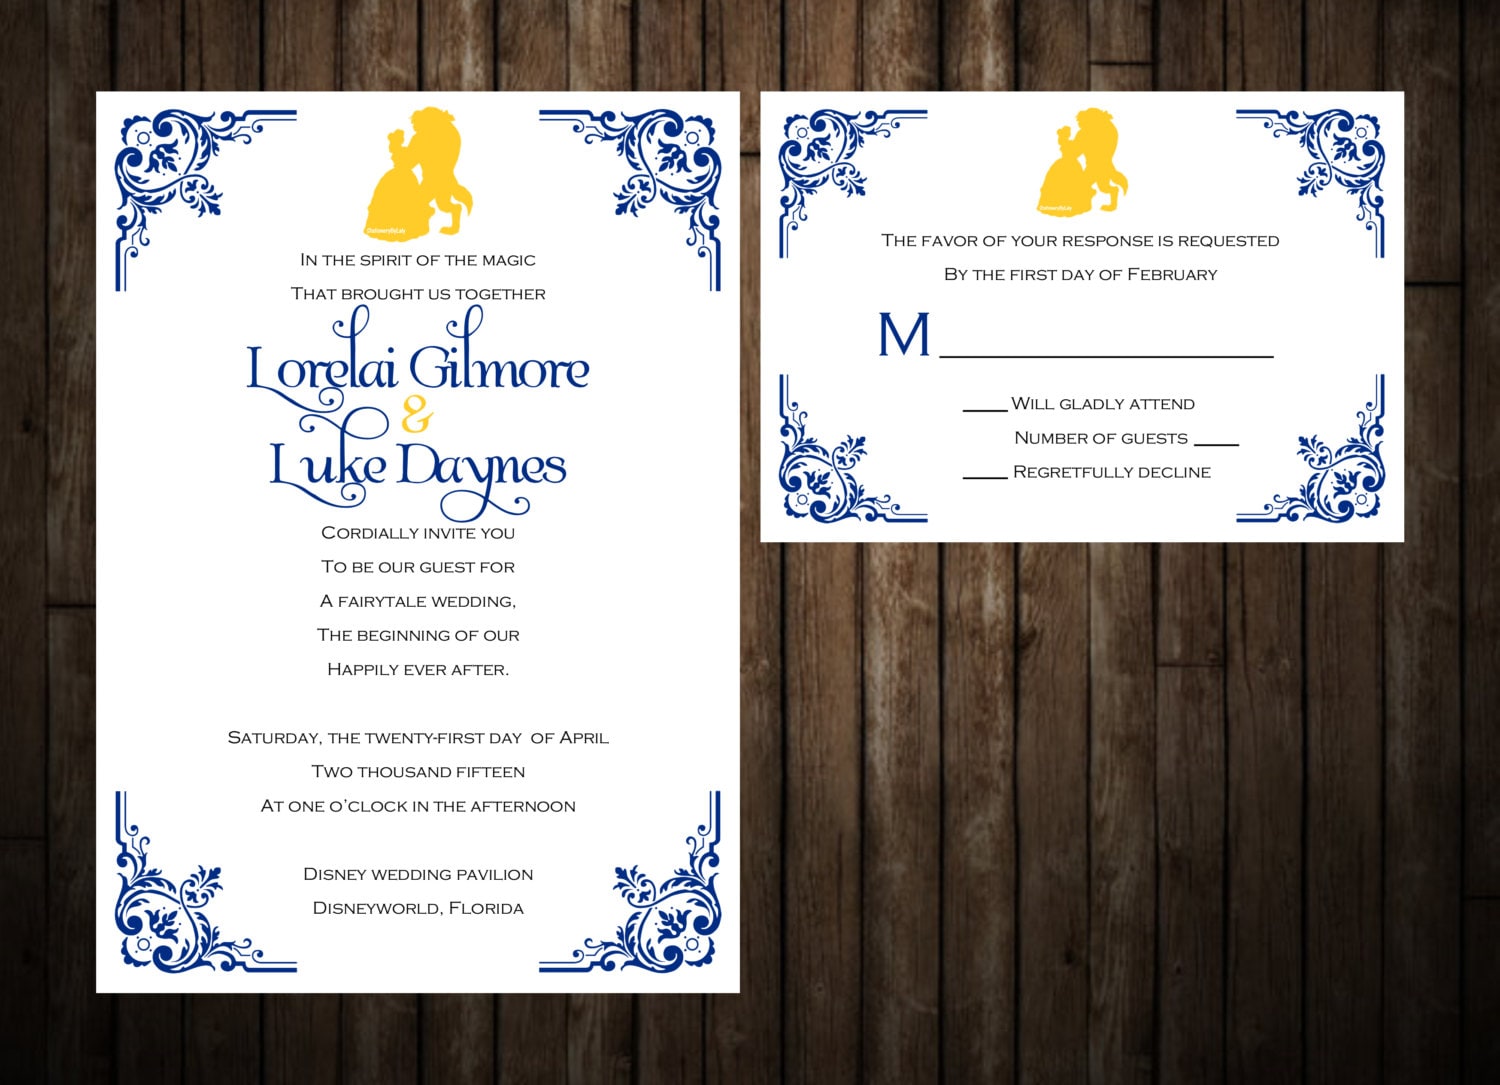 Beauty and The Beast Wedding Invitations by StationeryByLaly